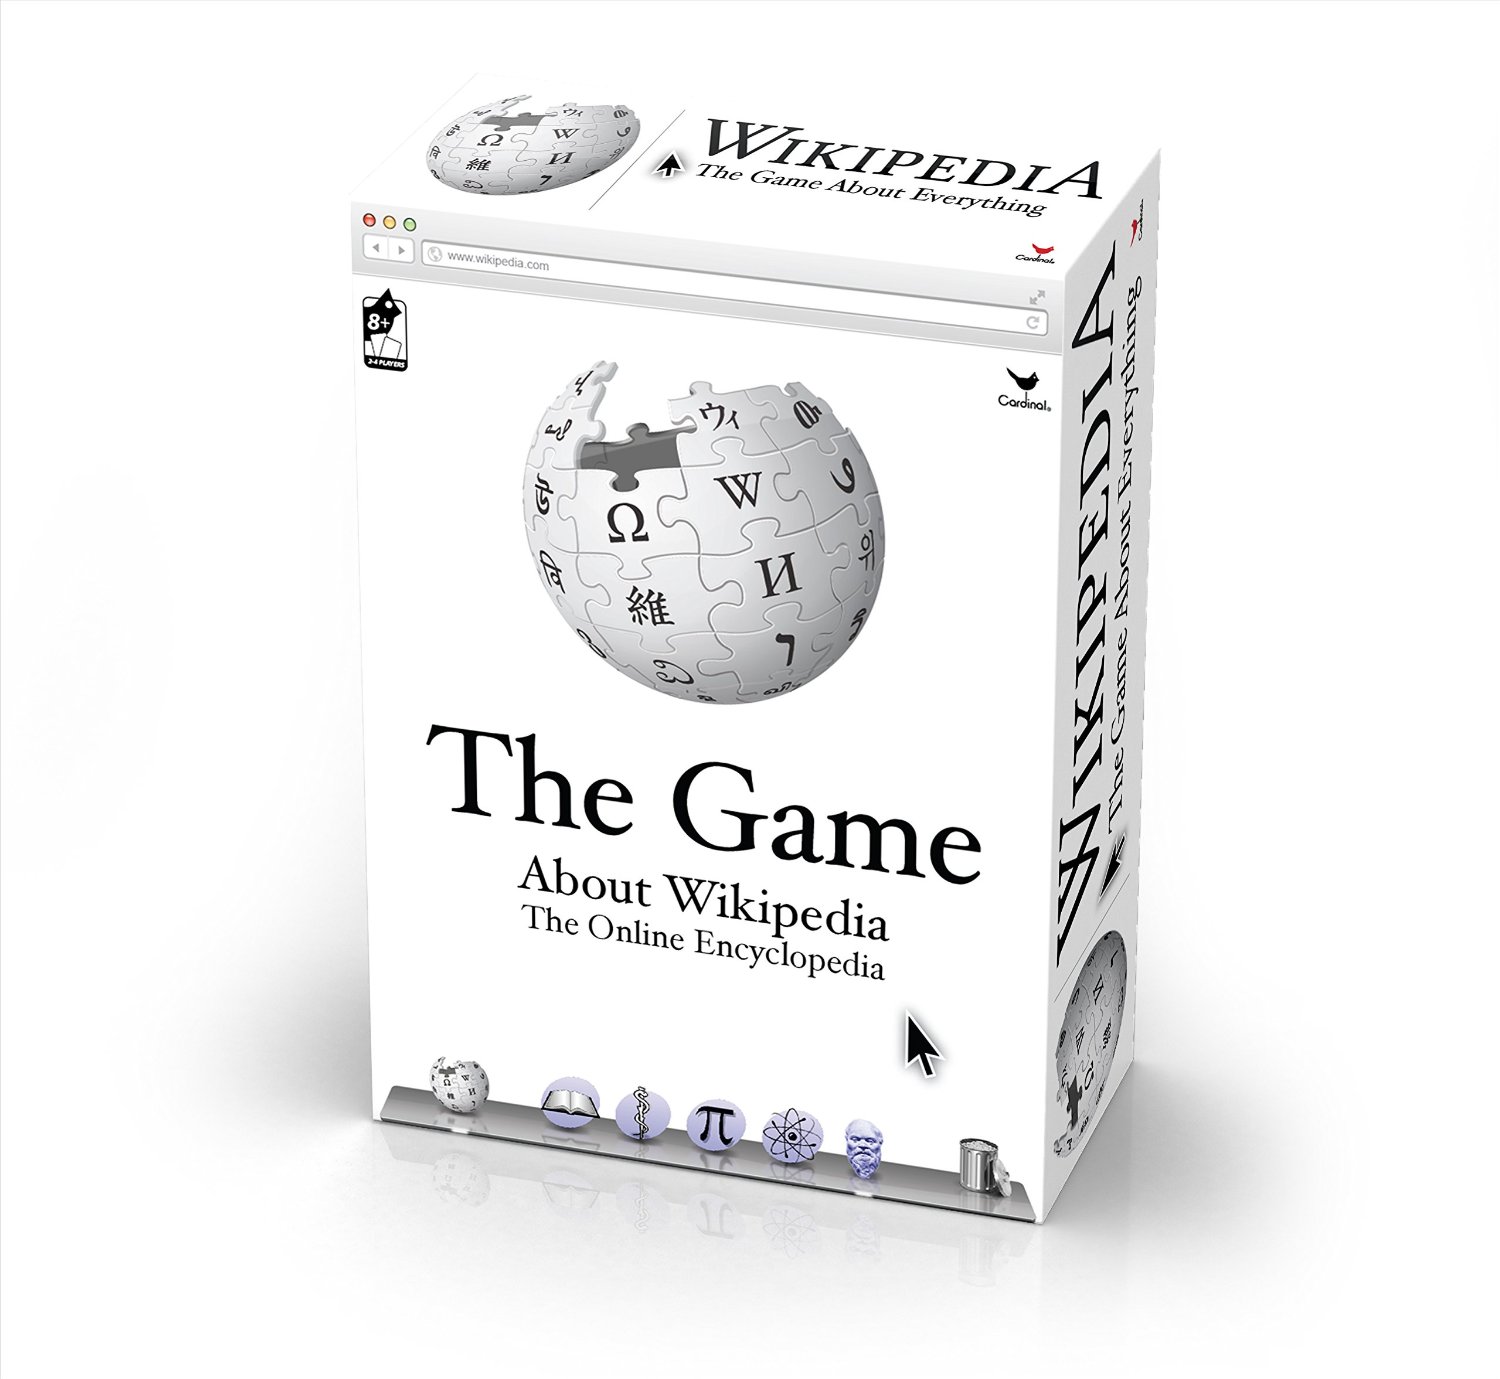 HURRY! The Game About Wikipedia Only $7.99 on Amazon! (Reg $24.99)